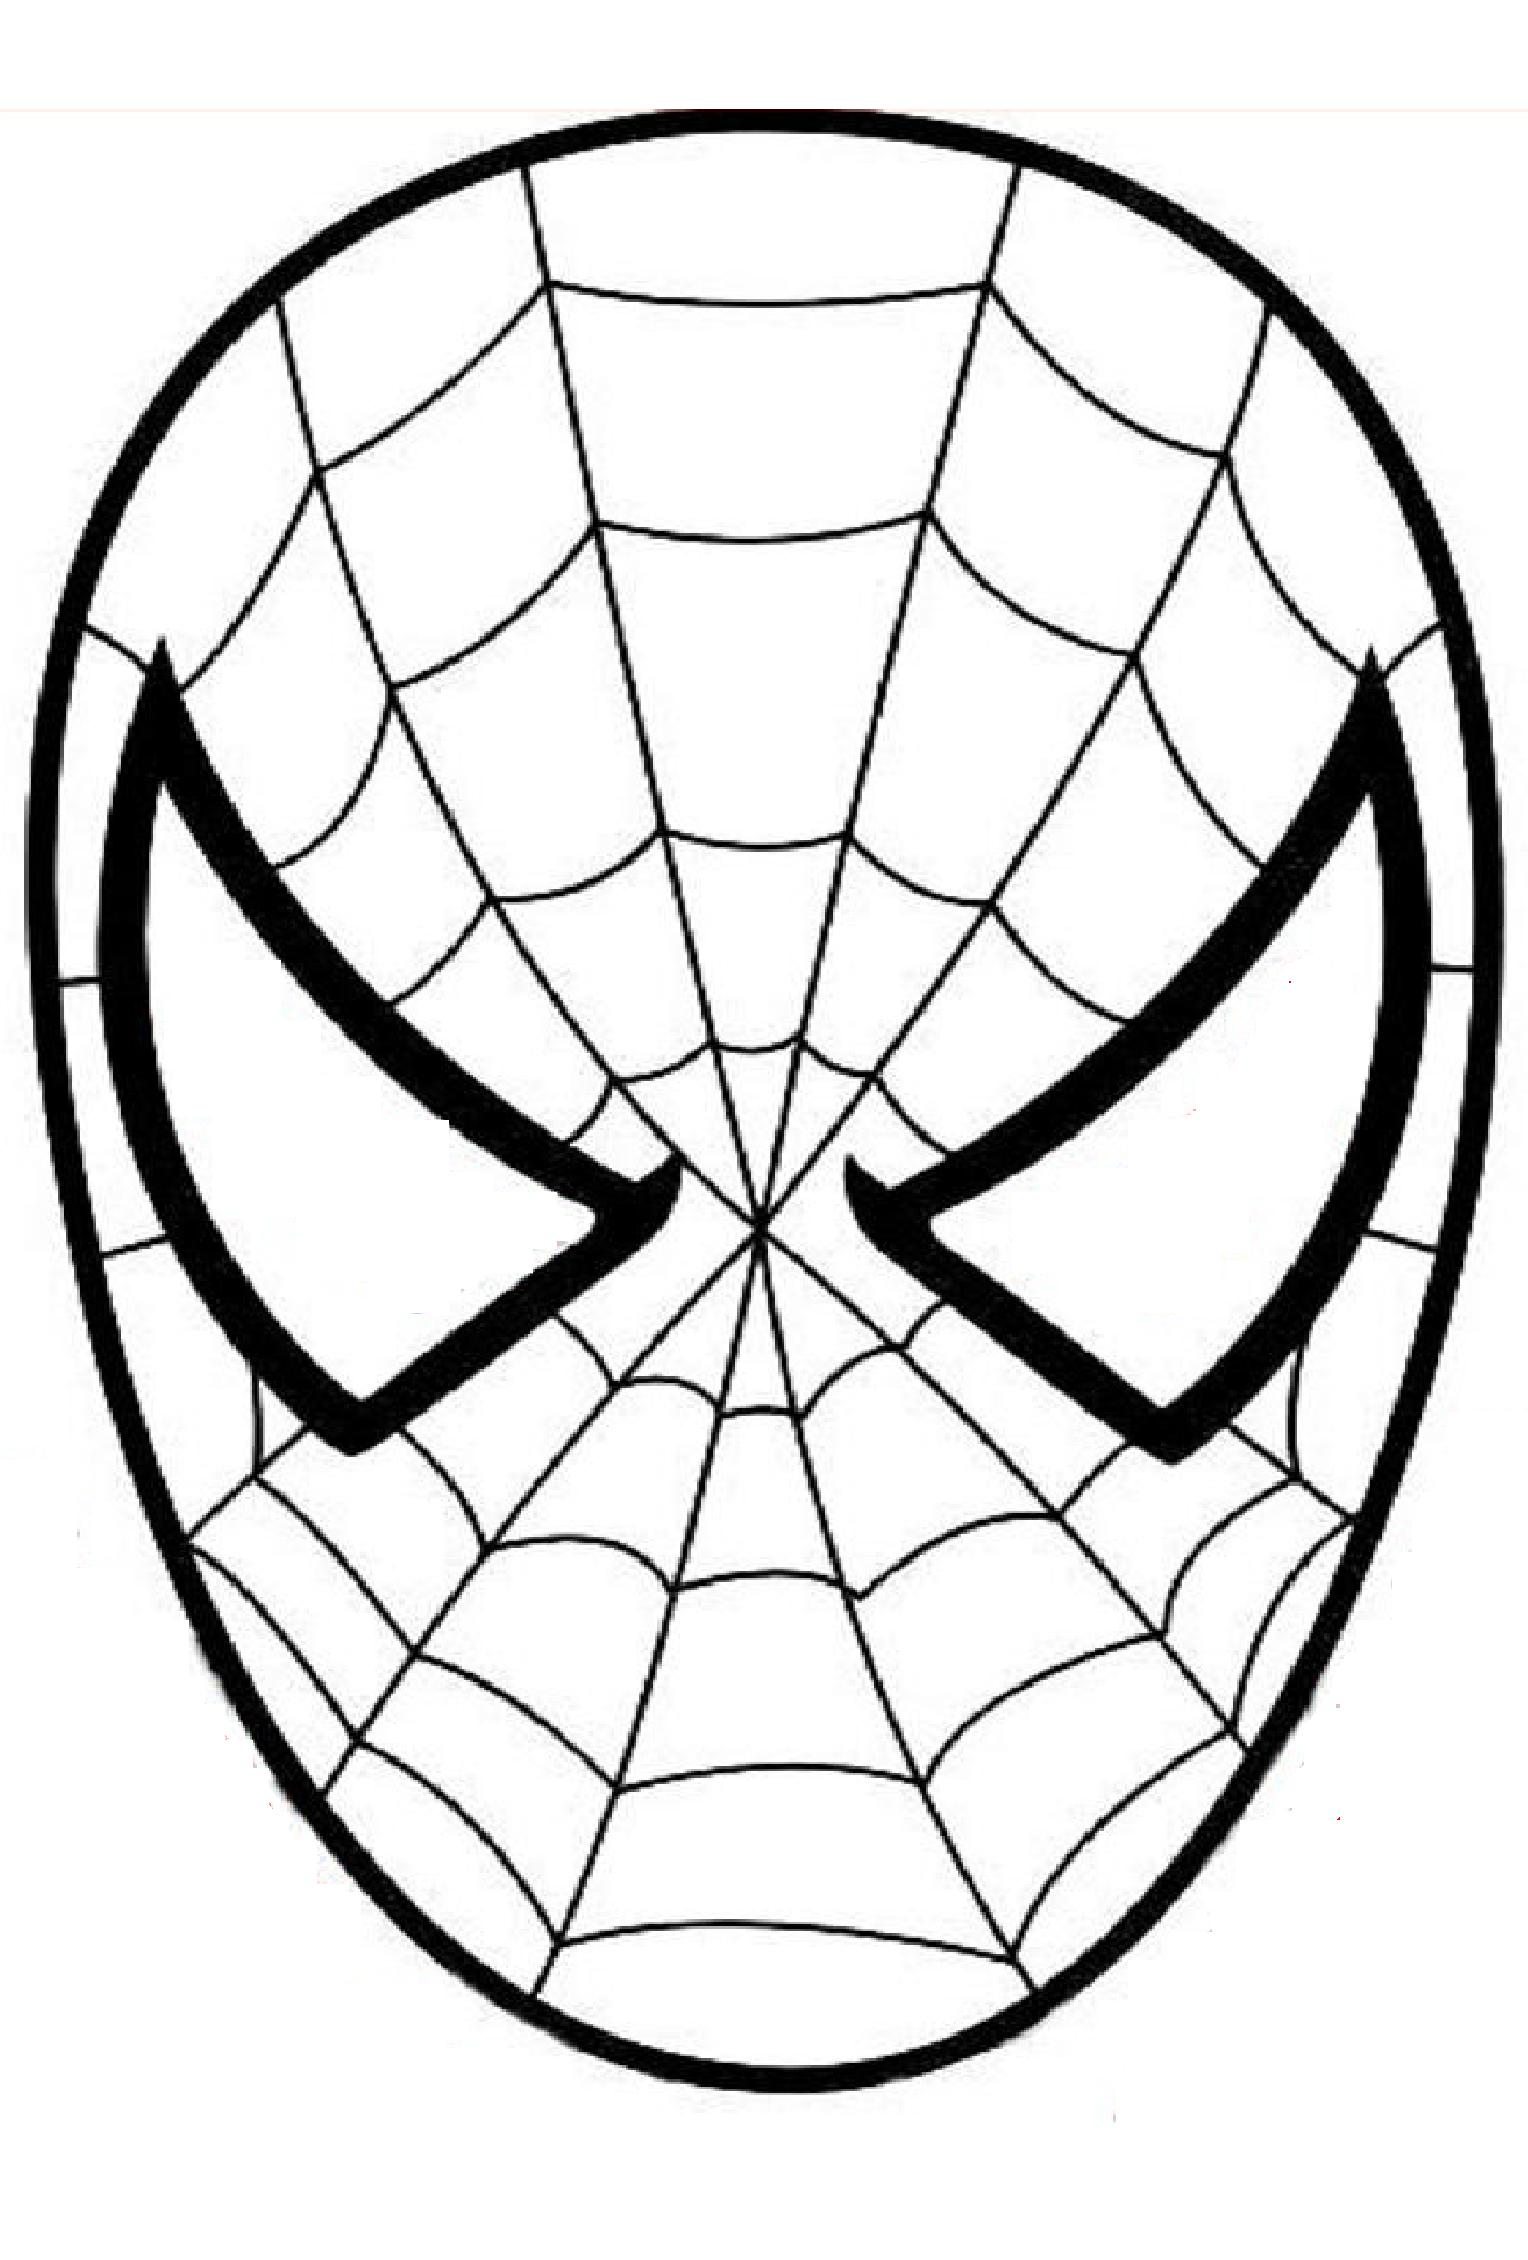 spiderman coloring pages